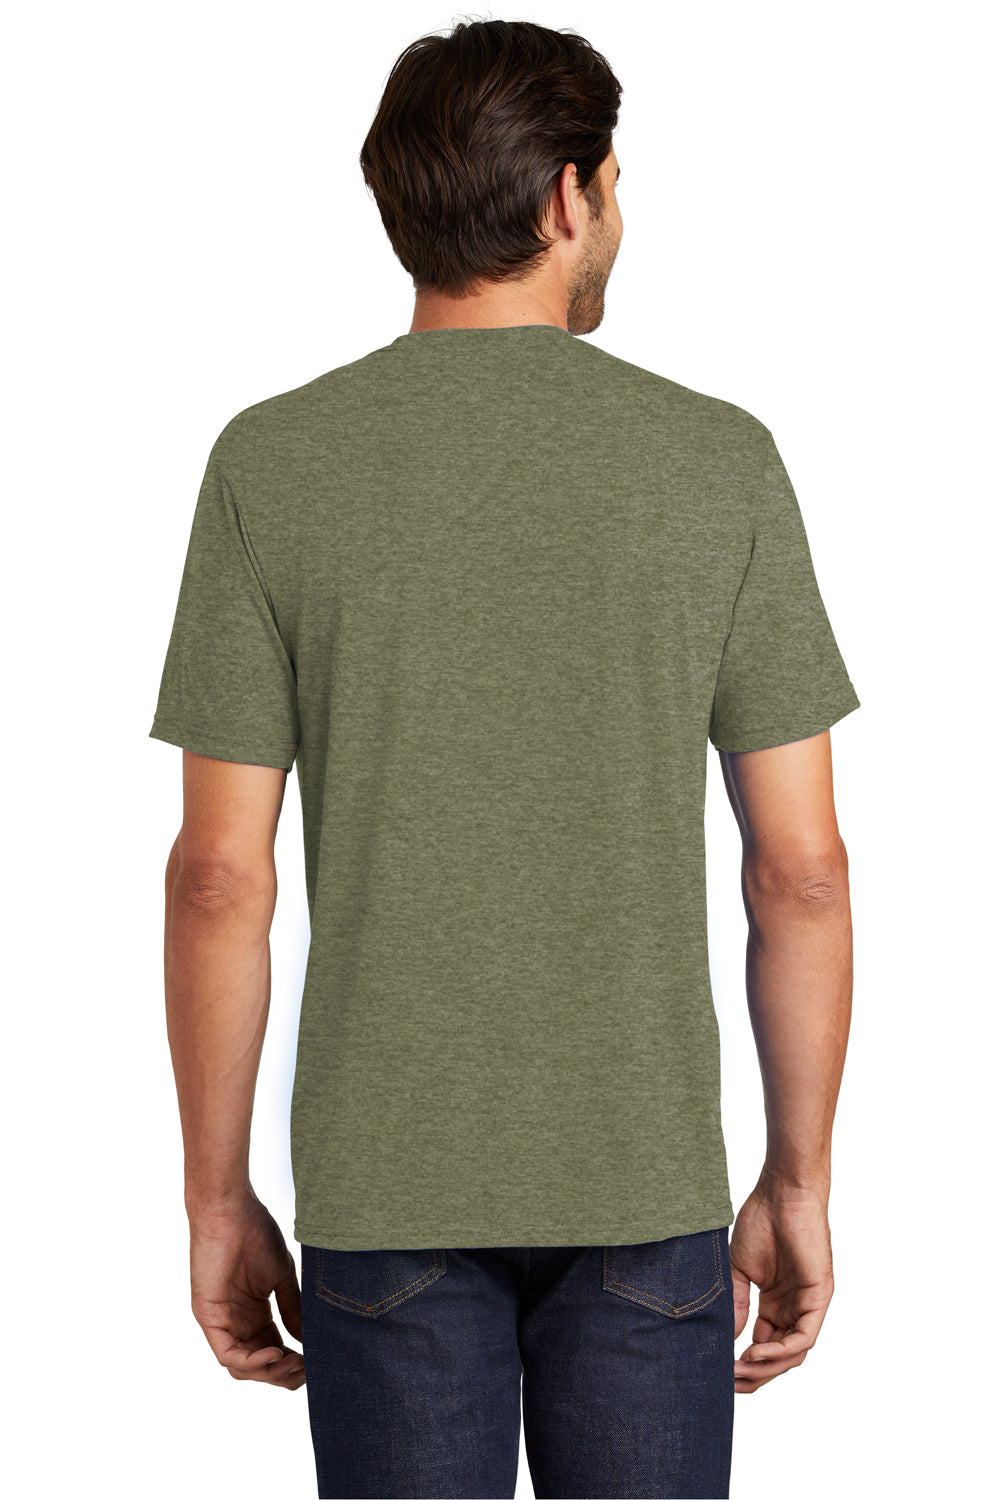 District DM130 Mens Perfect Tri Short Sleeve Crewneck T-Shirt Military Green Frost Back